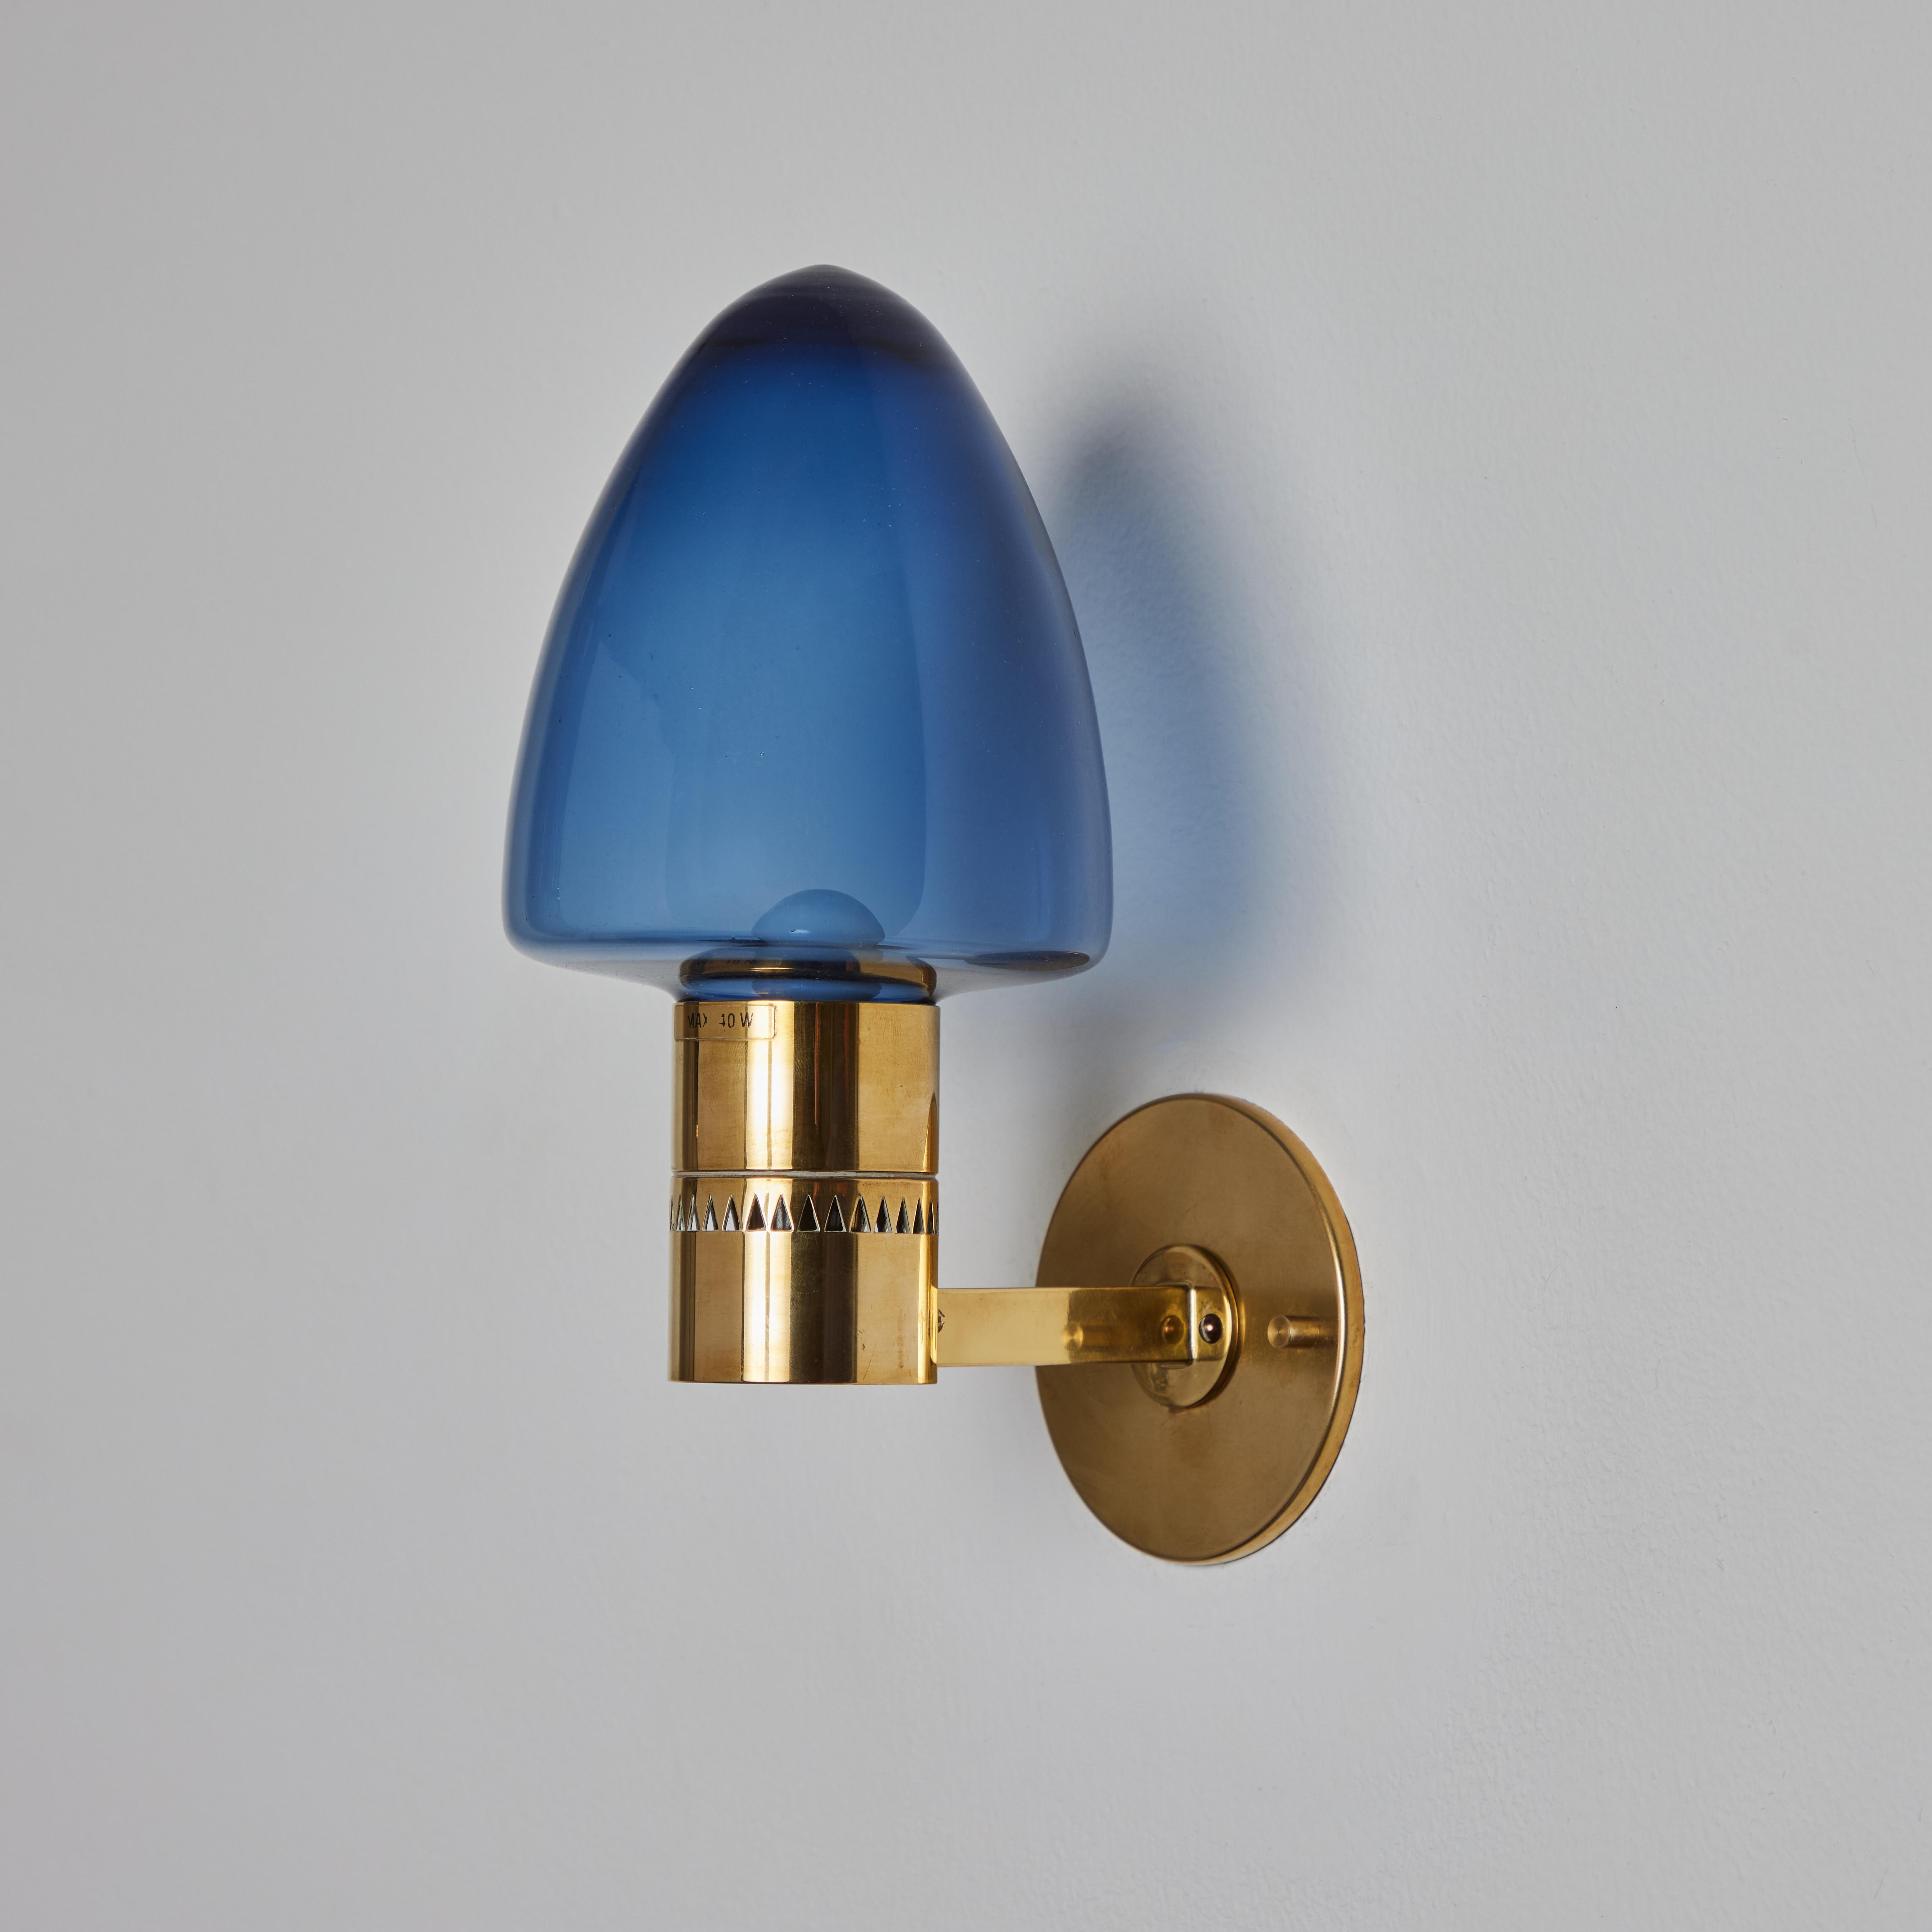 1960s Hans-Agne Jakobsson Model V-220 Brass & Blue Glass Sconce for Markaryd. An incredibly refined vintage design that is quintessentially Swedish. Executed in sculpturally bent brass and blown blue tinted glass.

Accommodates 1x 75w equivalent